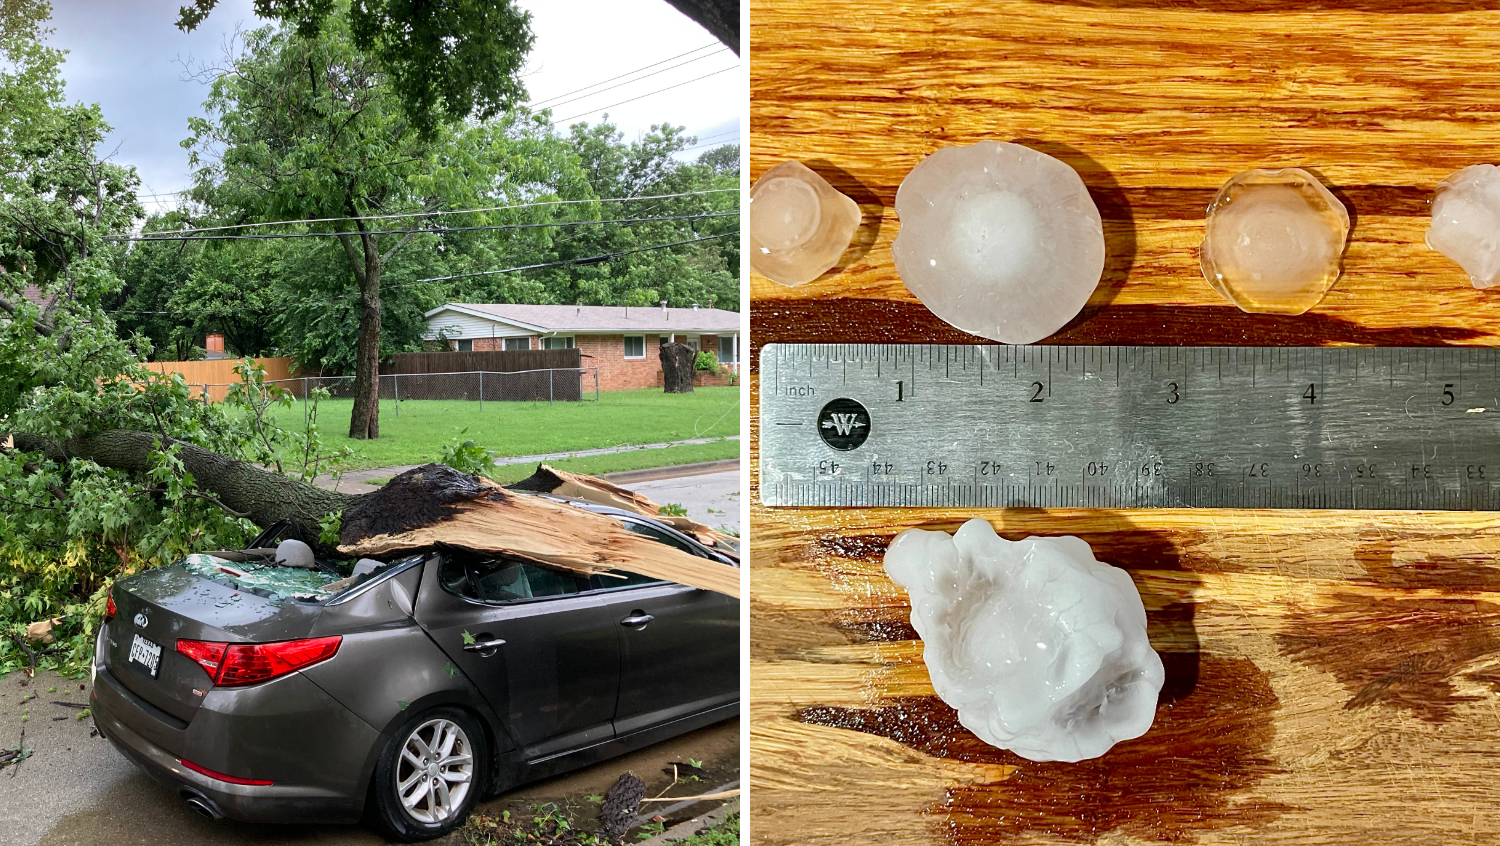 Photos show damage after hurricane-force winds, hail and heavy rain whip North Texas